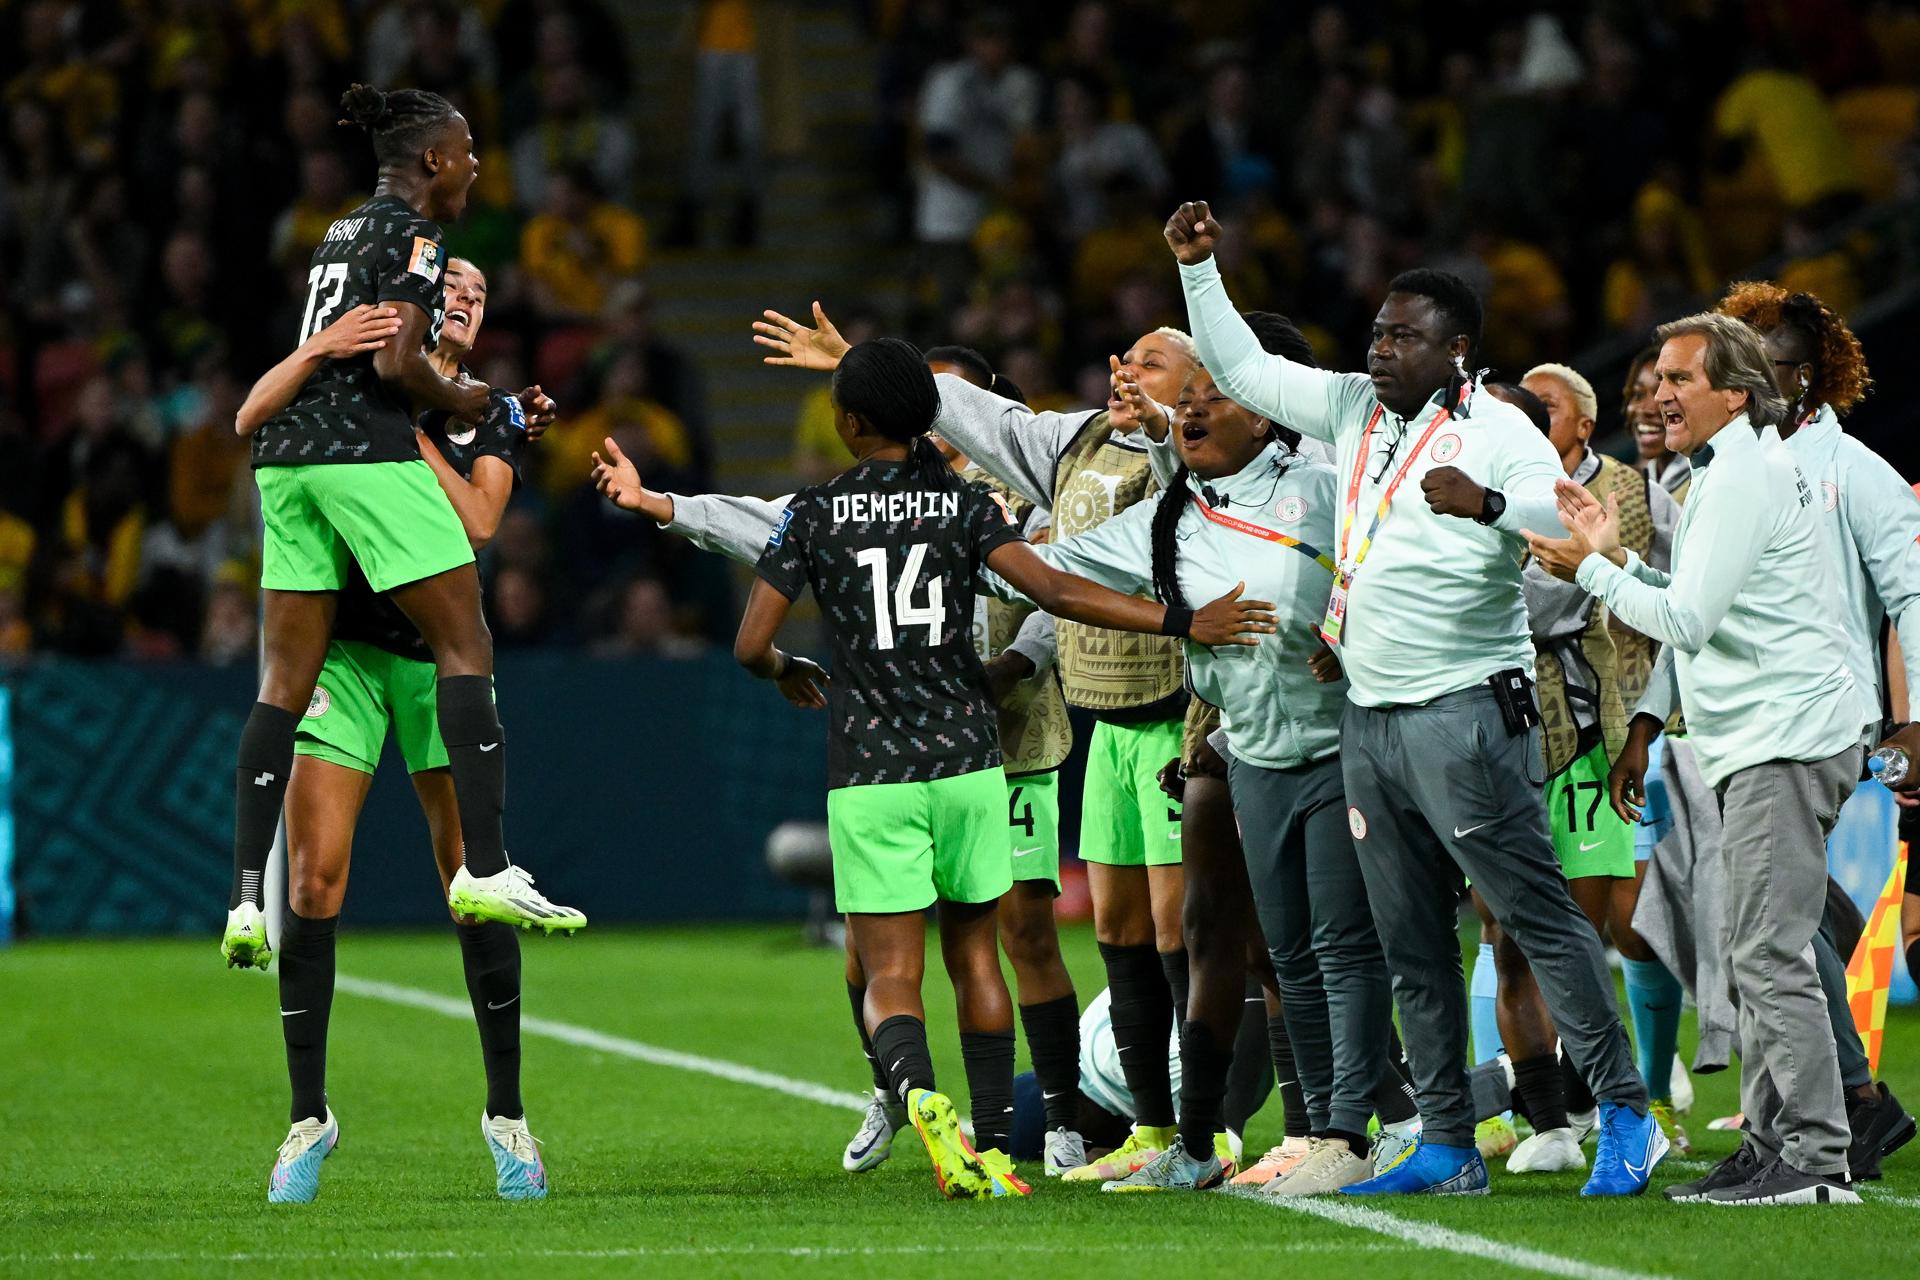 Nigeria's Uchenna Kanu (L) celebrates with teammates after against Australia during the FIFA Women's World Cup 2023 Group B match in Brisbane, Australia. EFE/EPA/DARREN ENGLAND AUSTRALIA AND NEW ZEALAND OUT EDITORIAL USE ONLY
